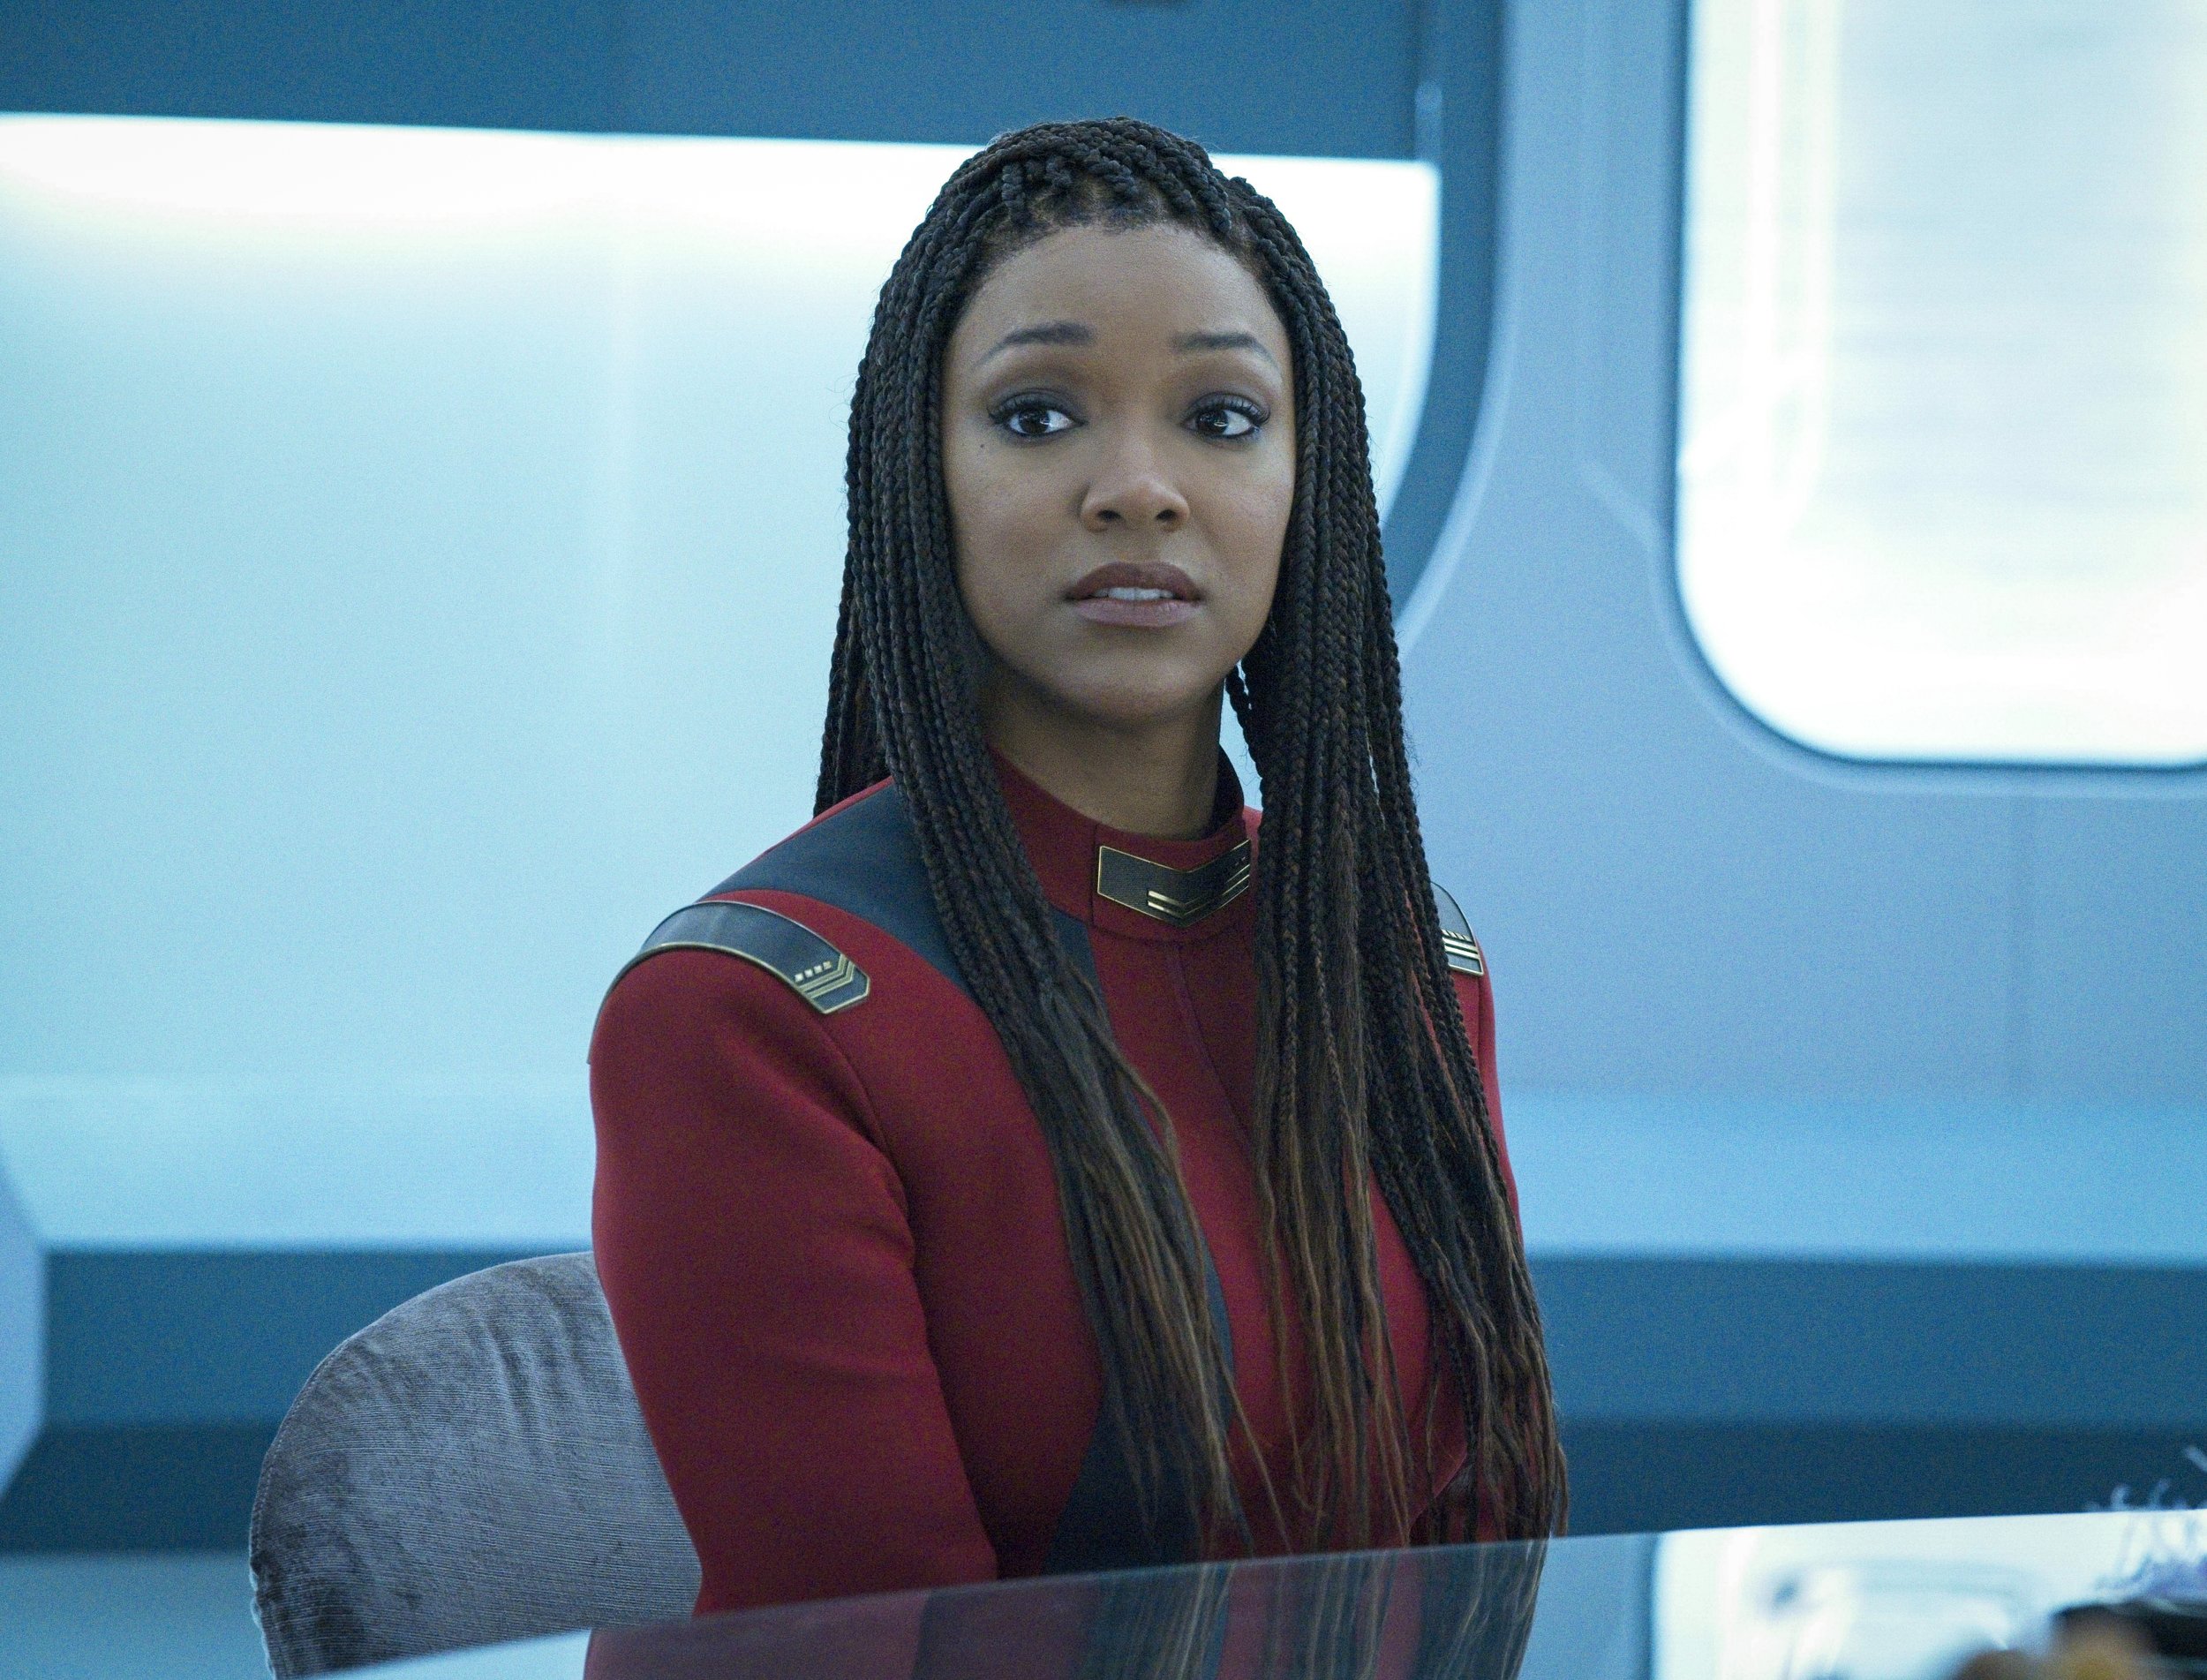   Pictured: Sonequa Martin-Green as Burnham of the Paramount+ original series STAR TREK: DISCOVERY. Photo Cr: Michael Gibson/Paramount+ (C) 2021 CBS Interactive. All Rights Reserved.  